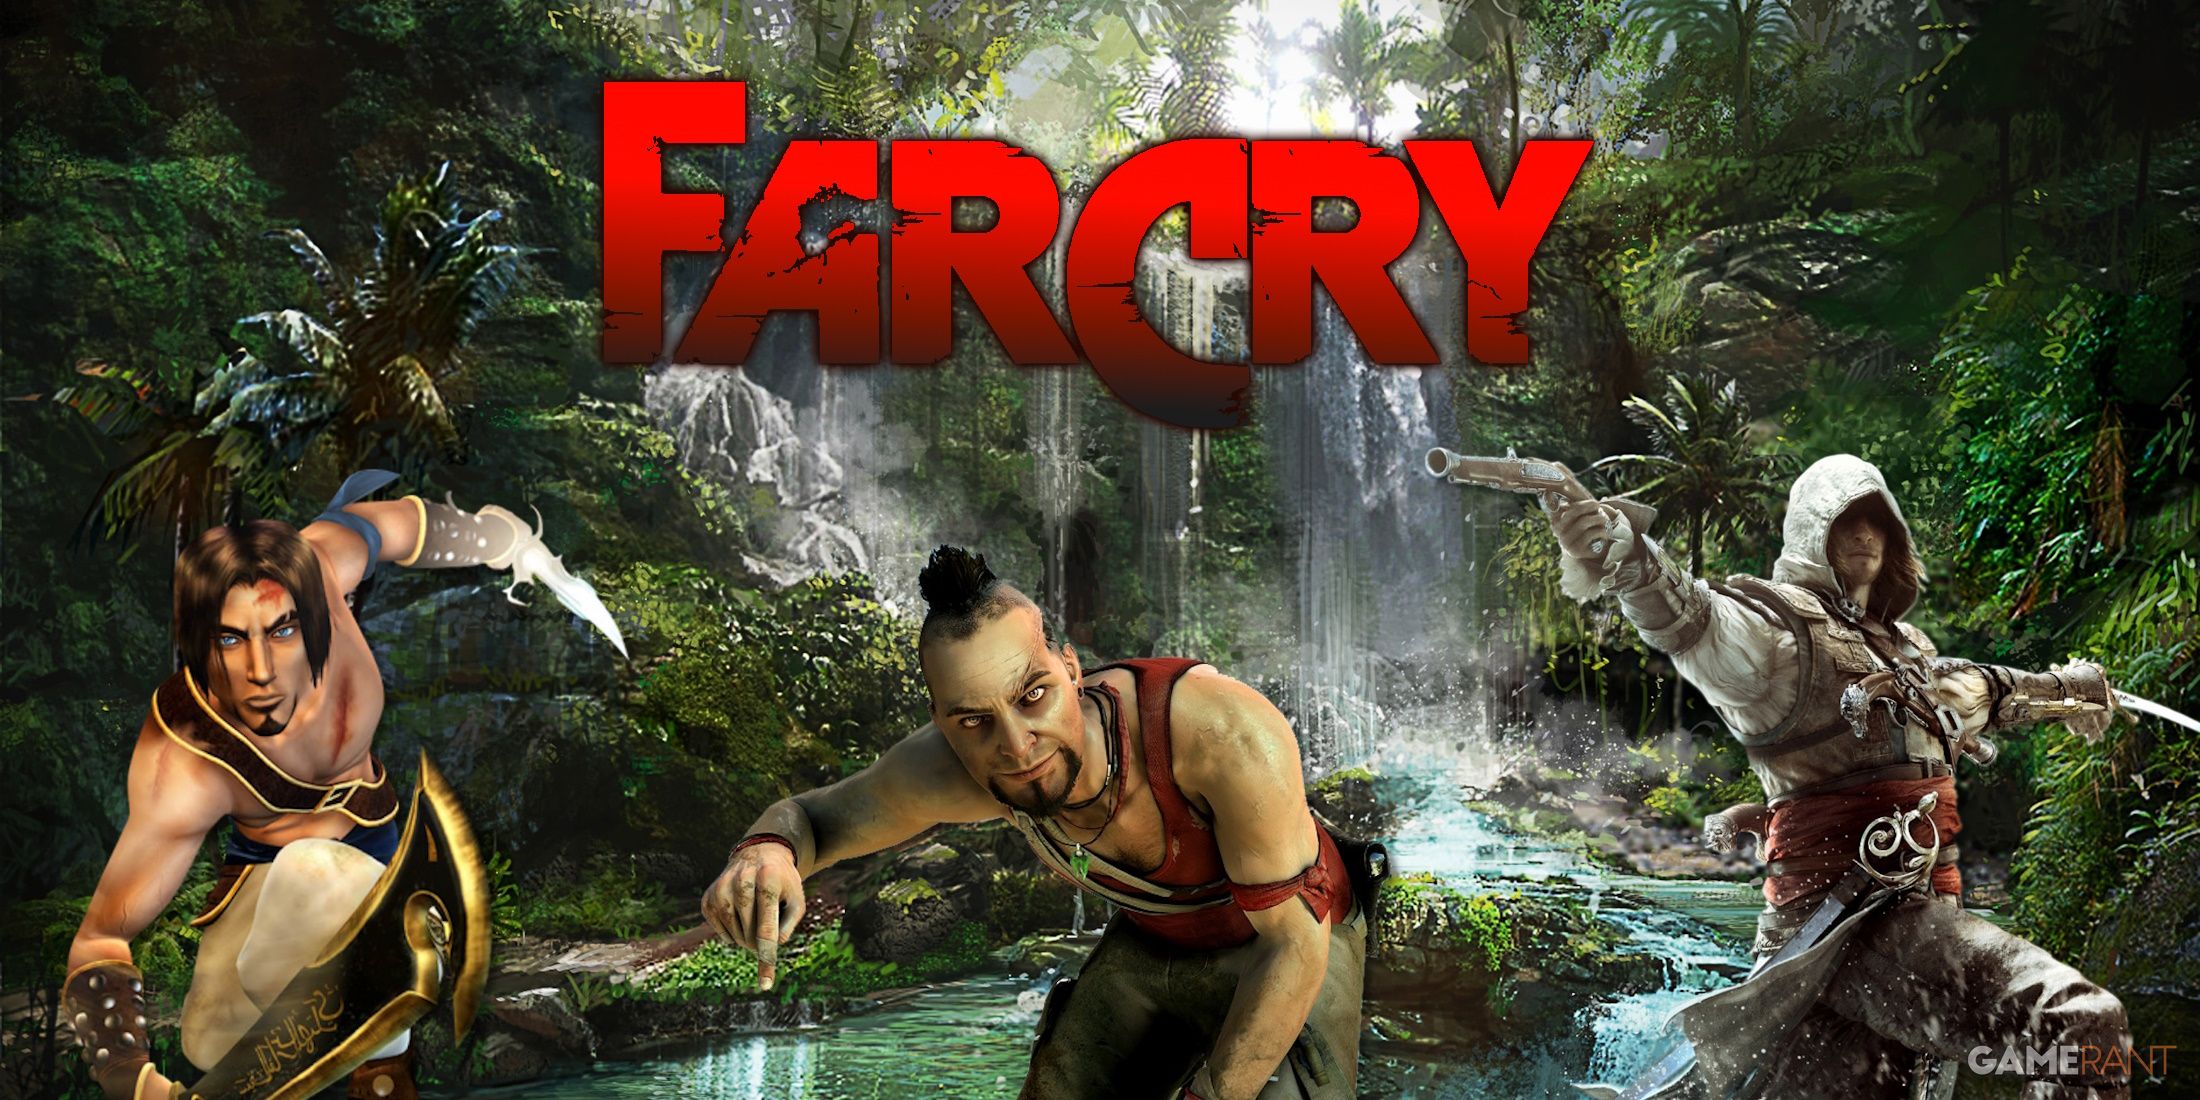 Far Cry 3 promo art overlaid with Prince of Persia, Assassin's Creed, and Vaas